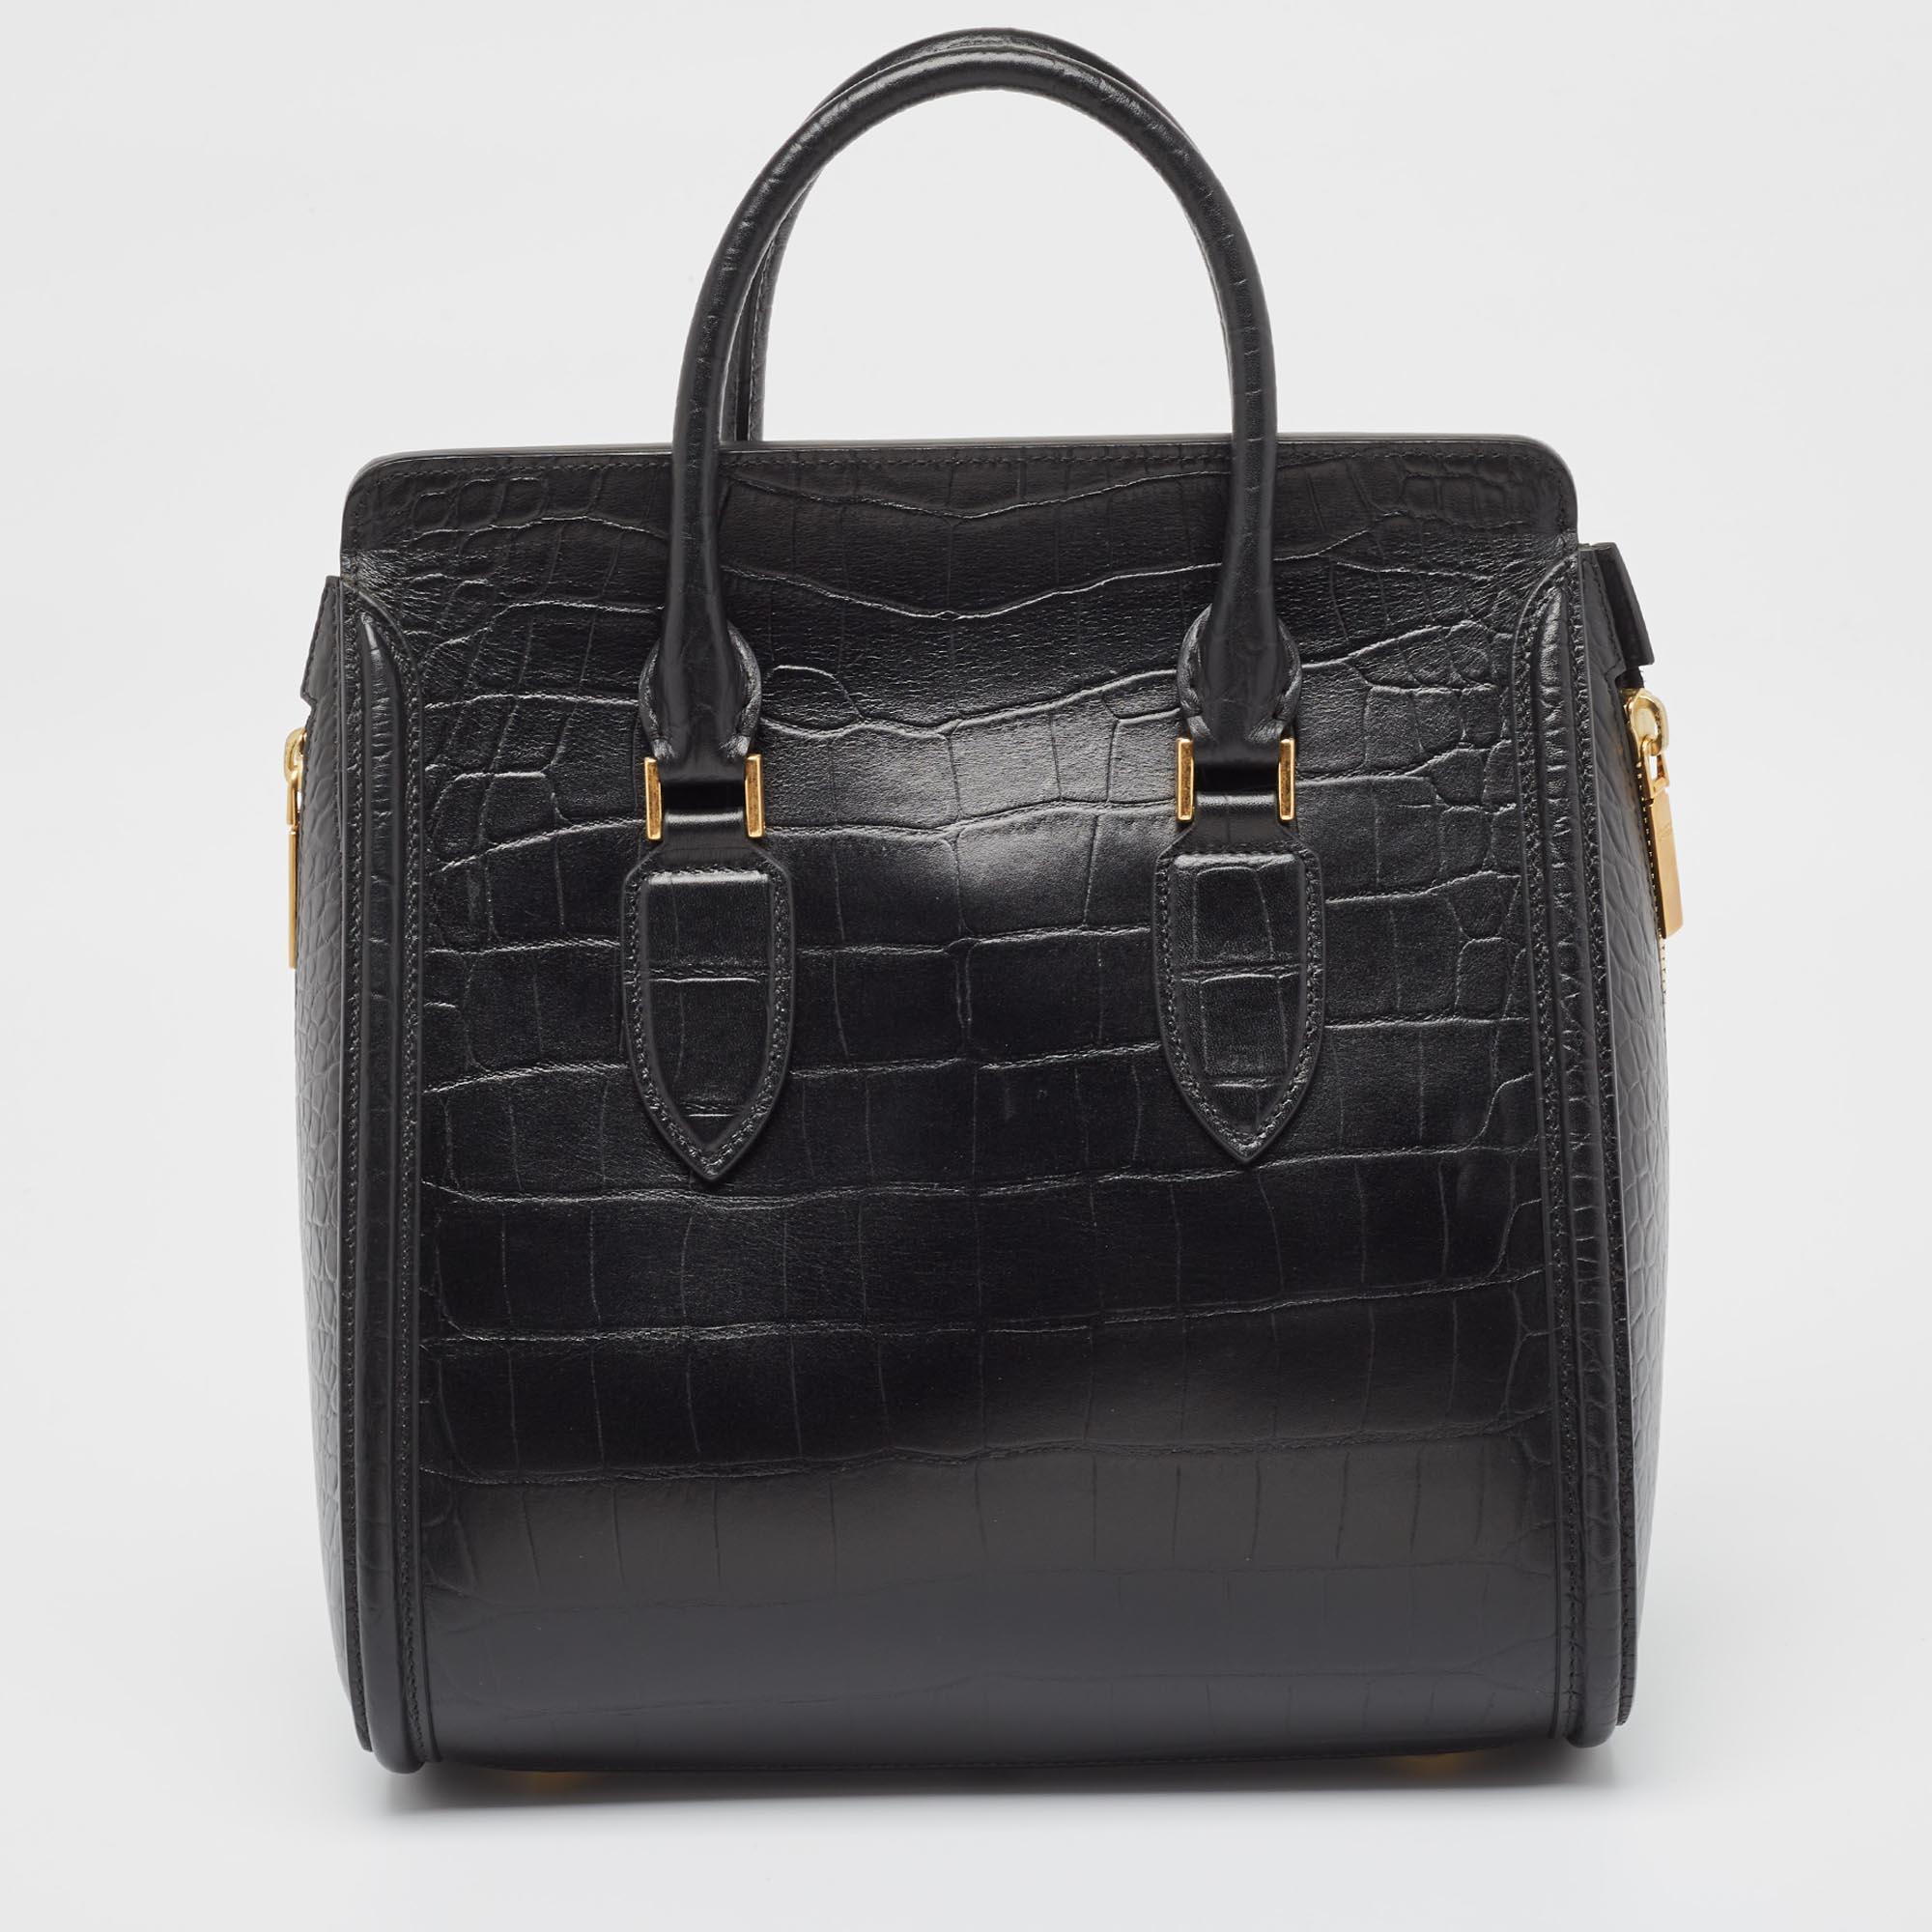 A sturdy fine leather body and double carry handles, the bag comes with a structured design and a flap closure for the main pocket. With gold-toned hardware to complement the sophisticated styling, it features a large pocket and a rigid base with